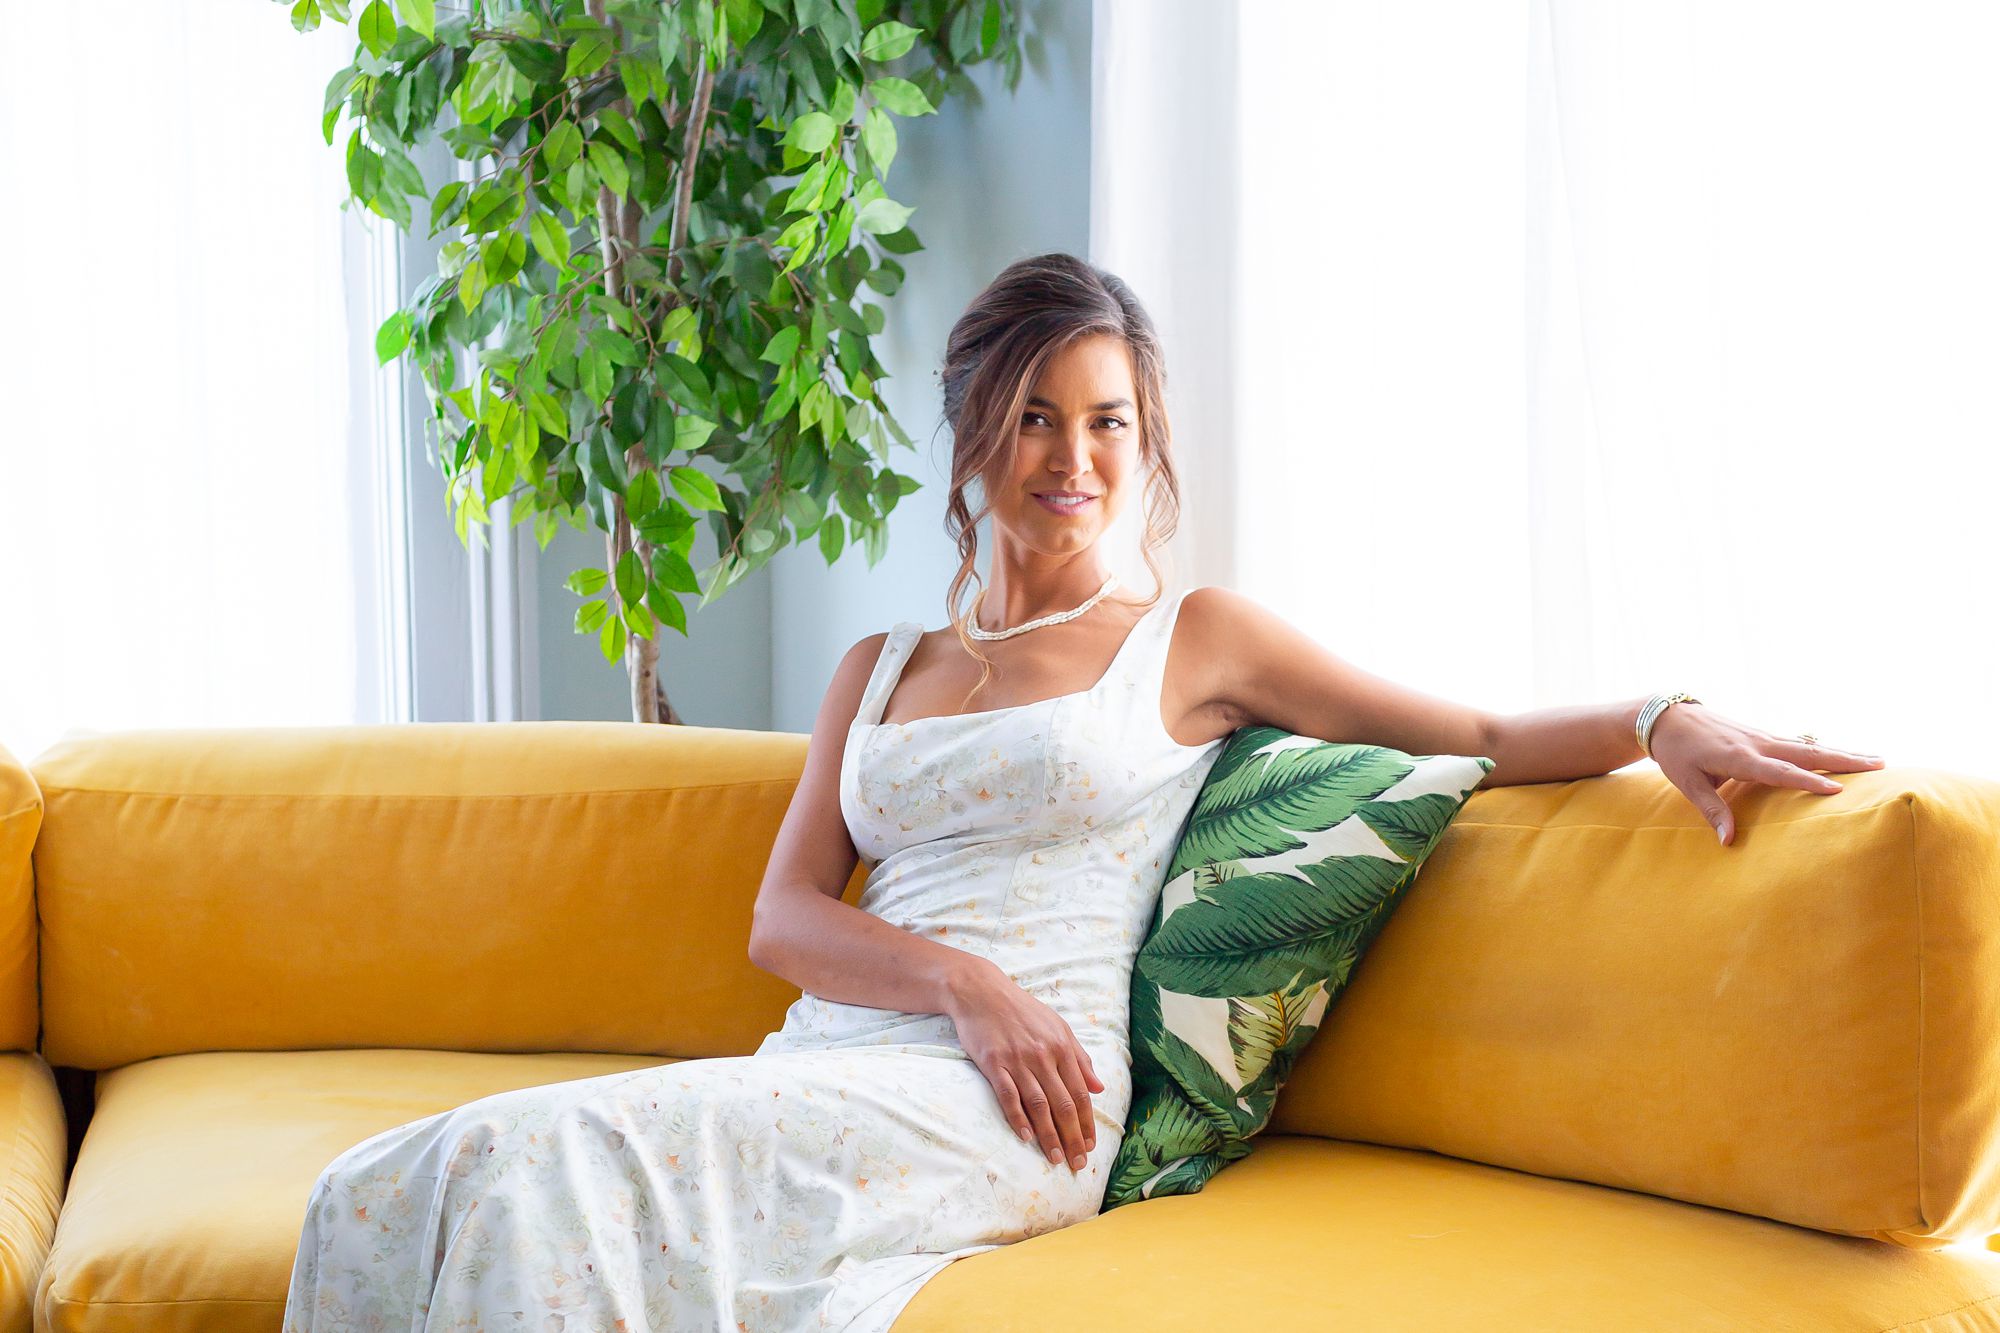 A bride sits on a yellow couch.